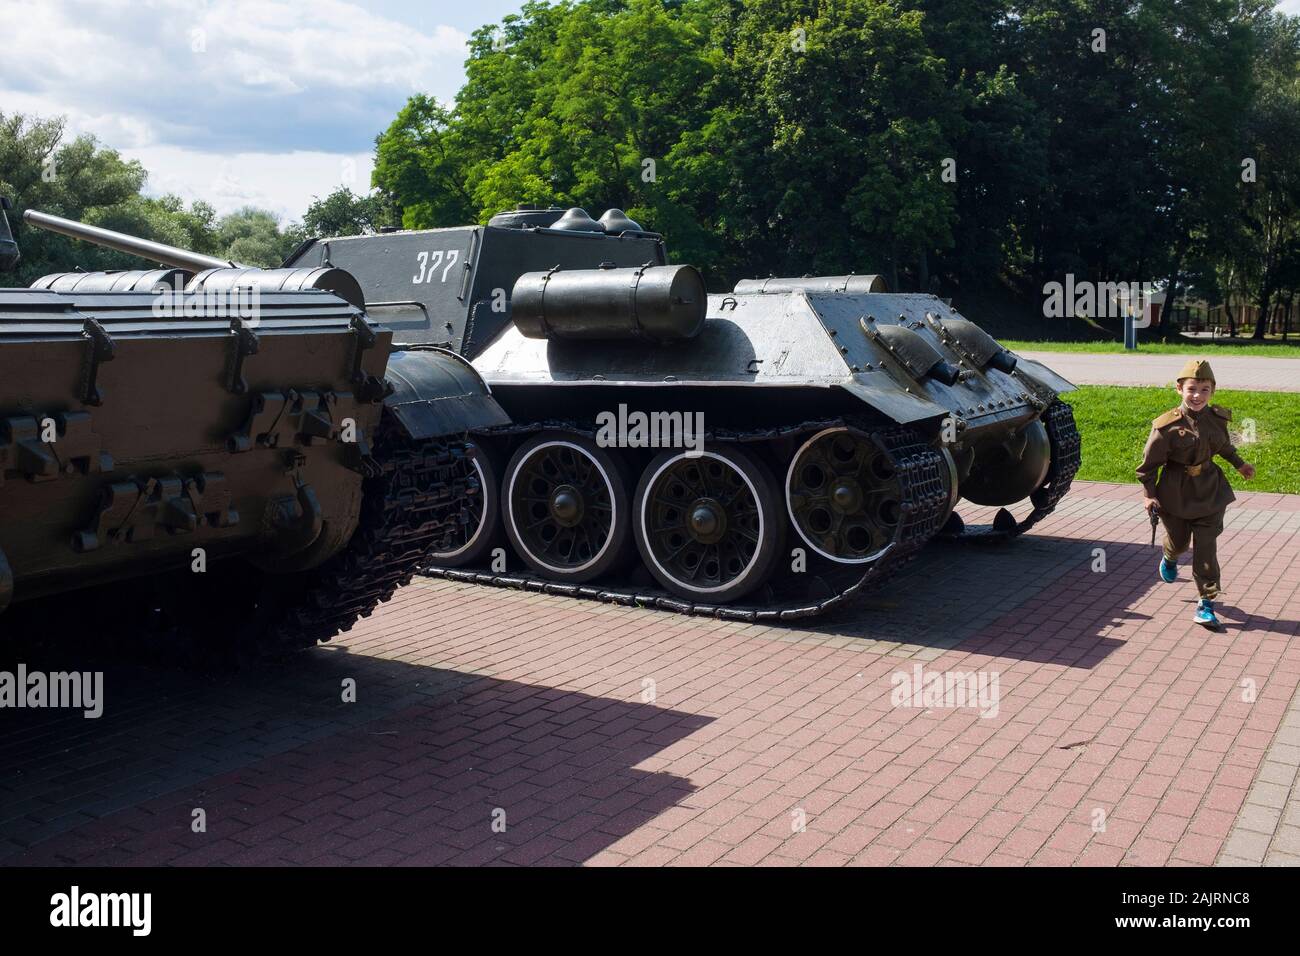 Soviet era tanks and big guns are a part of the items on display at the Brest War Memorial in Belarus Stock Photo